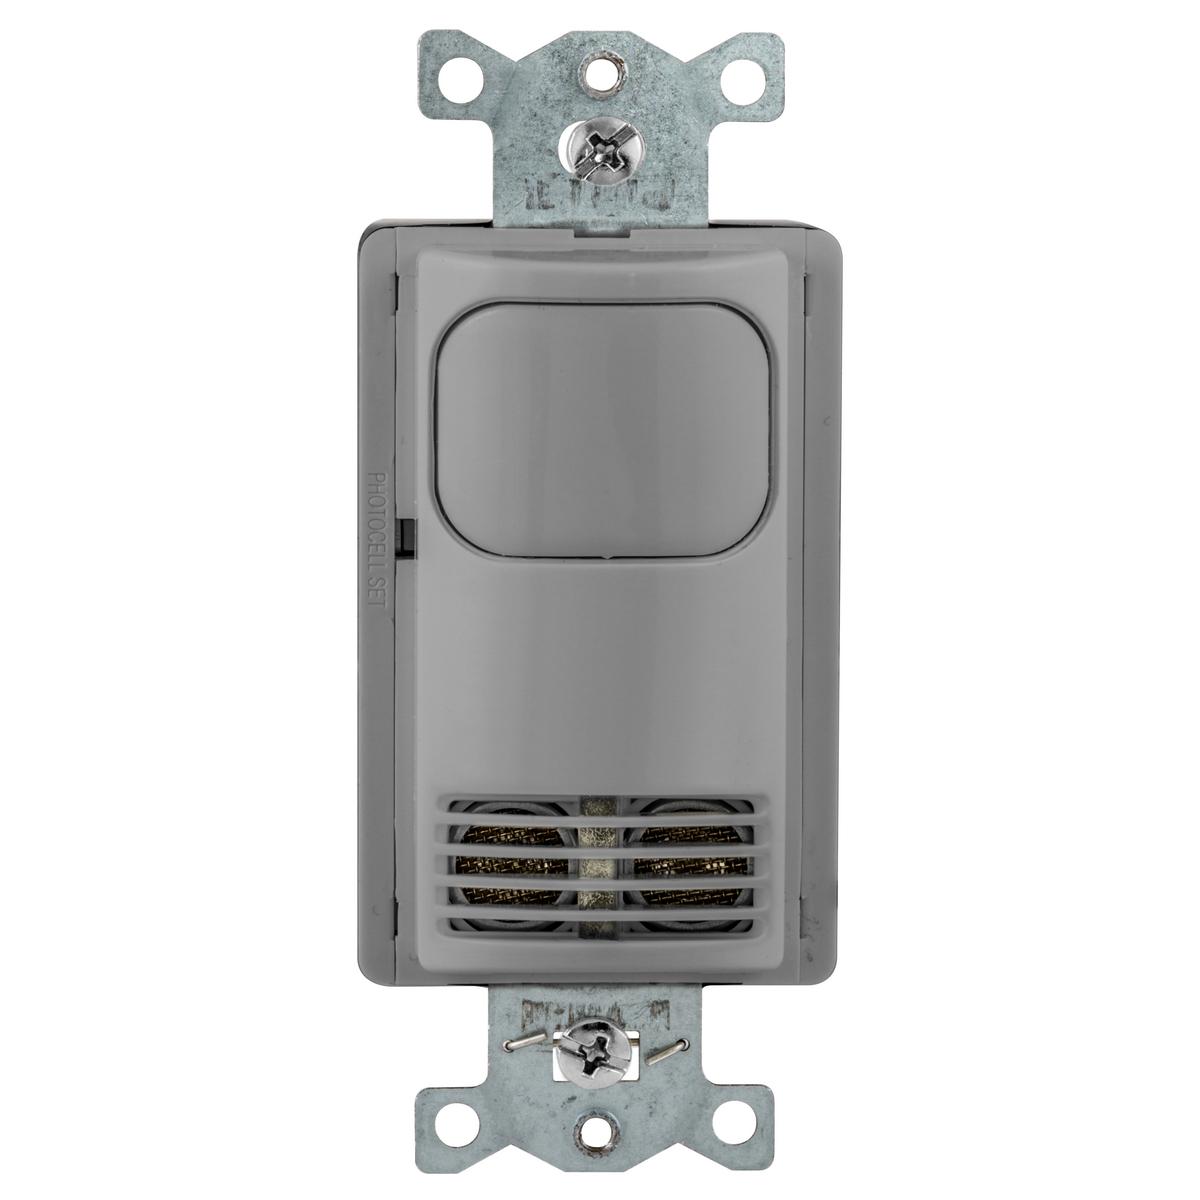 Hubbell MSD2000GY2N Occupancy Sensing Products, Wall Switch, Occupancy or Vacancy, Dual Tech, 2 Relay, 1000 Square Feet, 800W Incandescent, 1000W Fluorescent @ 120V AC, 1800W Fluorescent @ 277V 